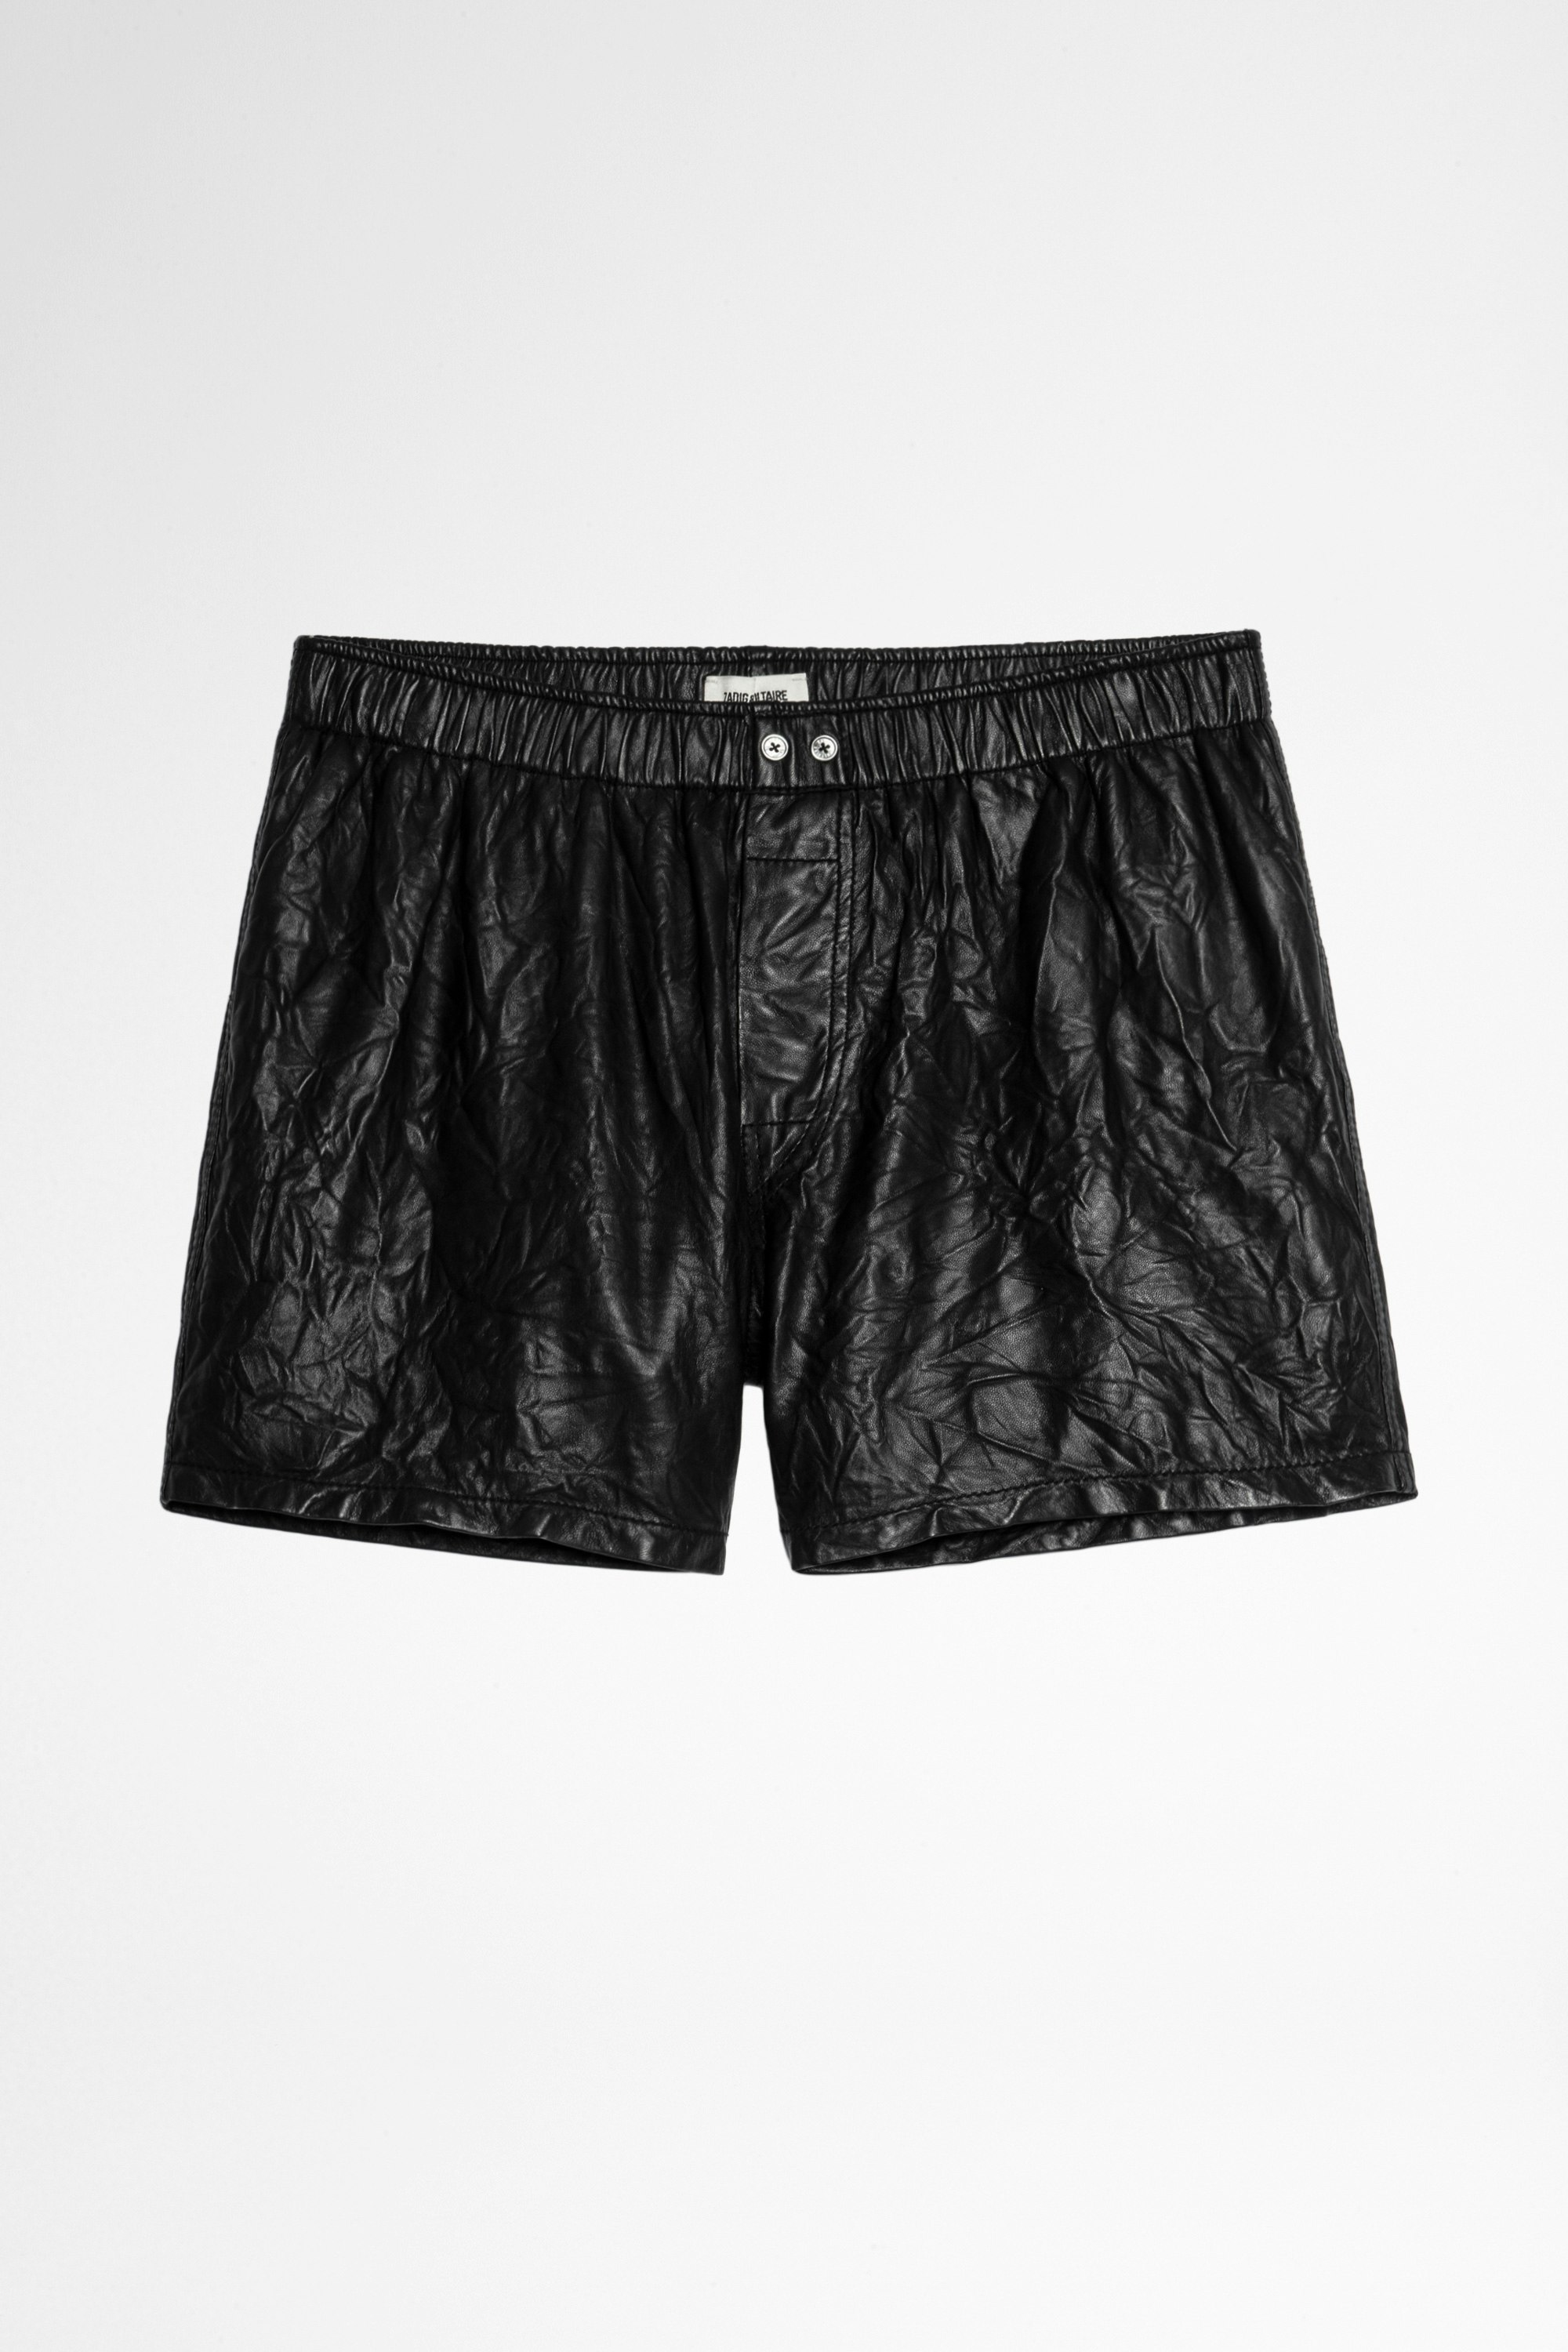 Pax Shorts Crinkled Leather Women’s black leather shorts.